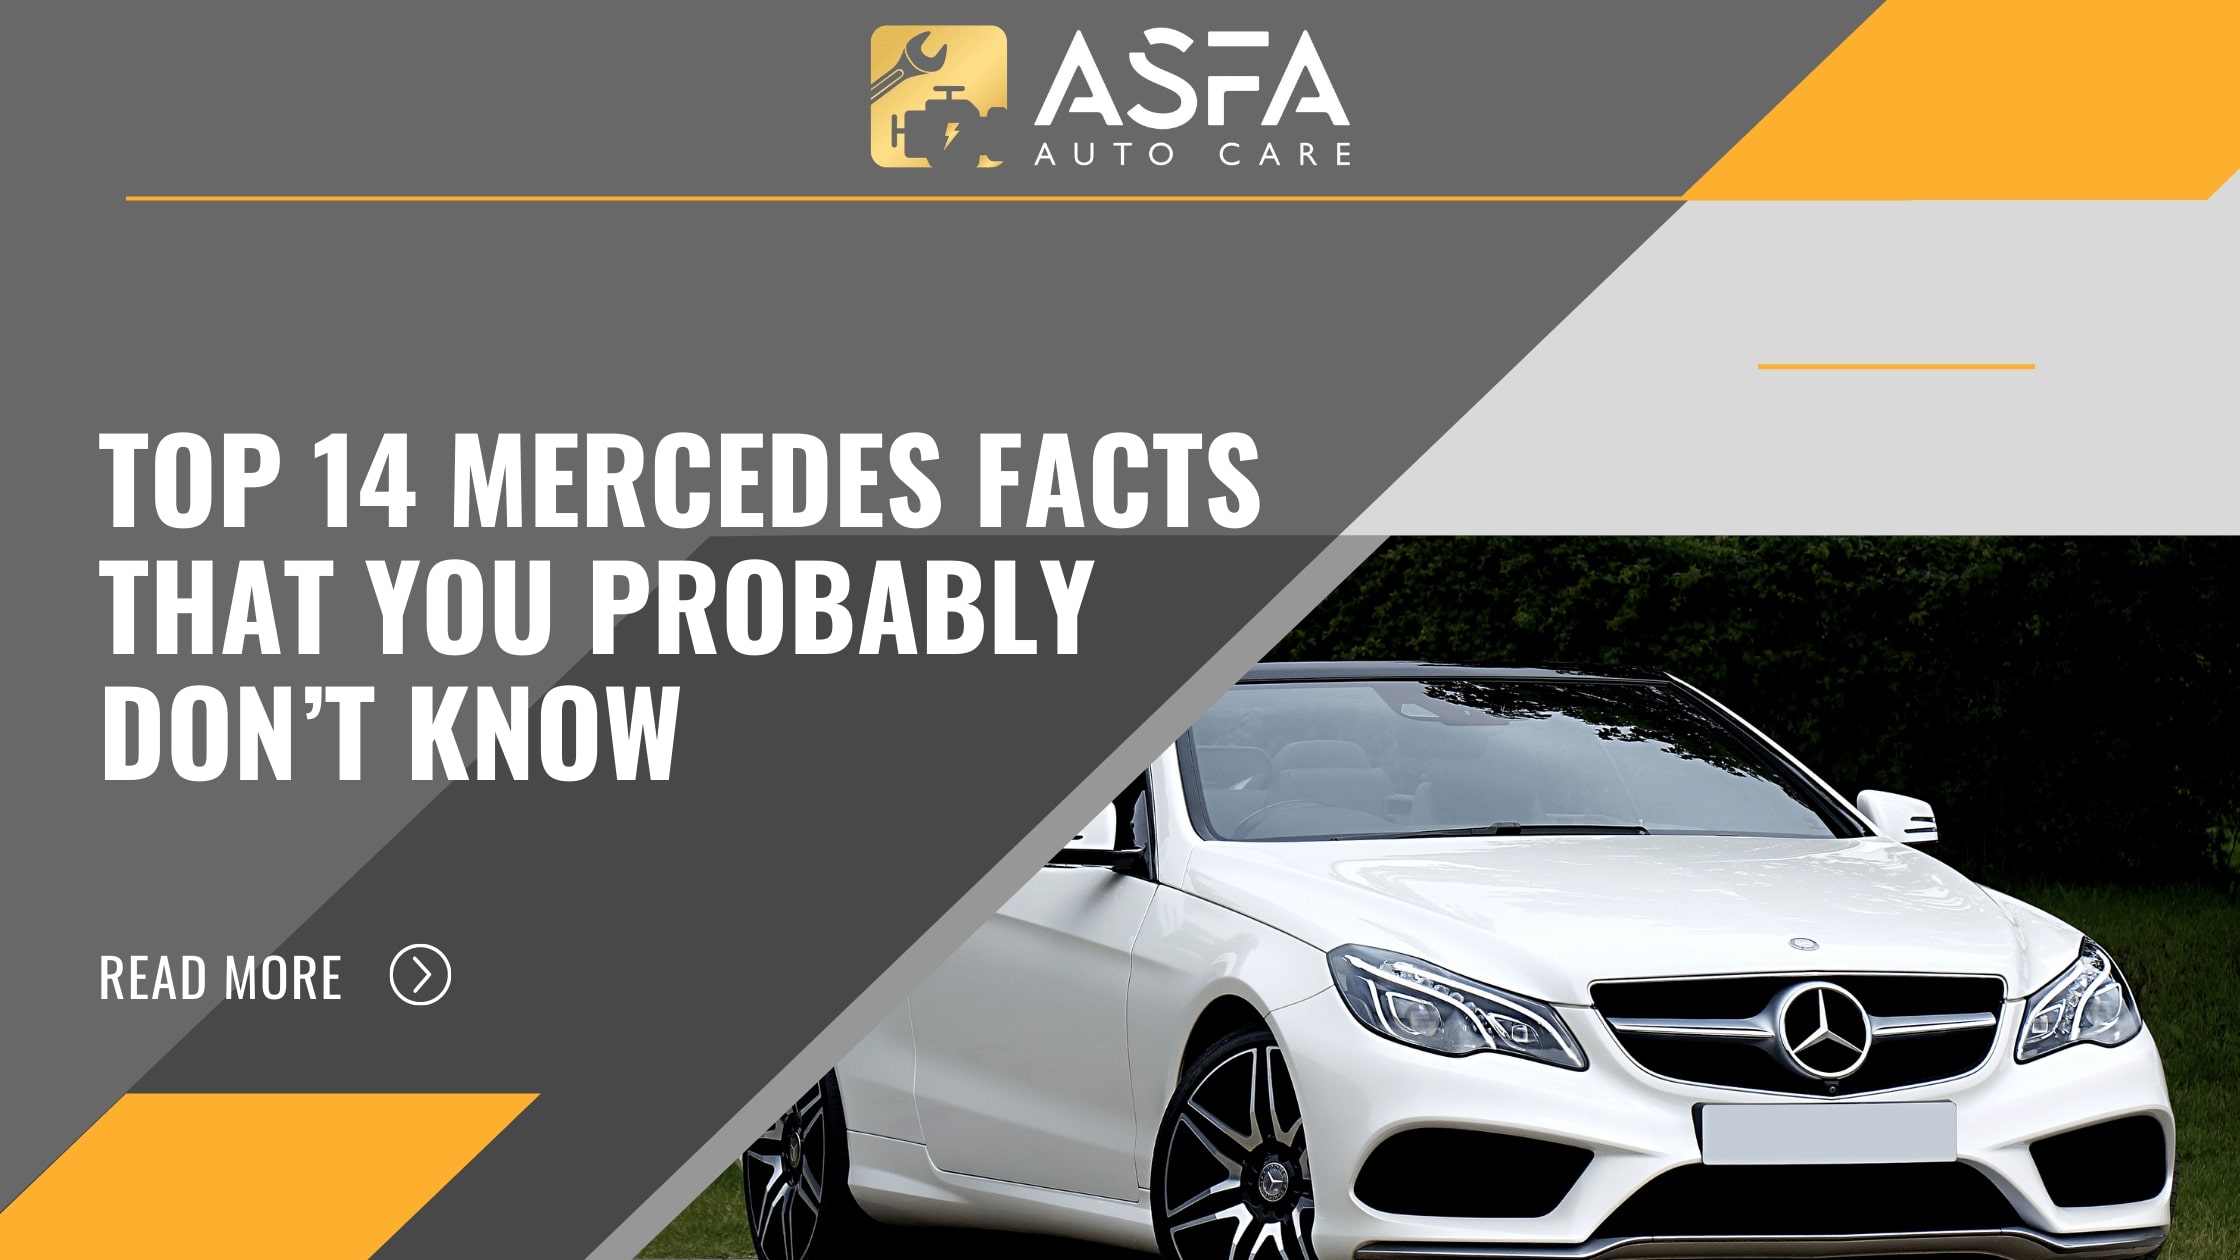 Top 14 Mercedes Facts That You Probably Don’t Know